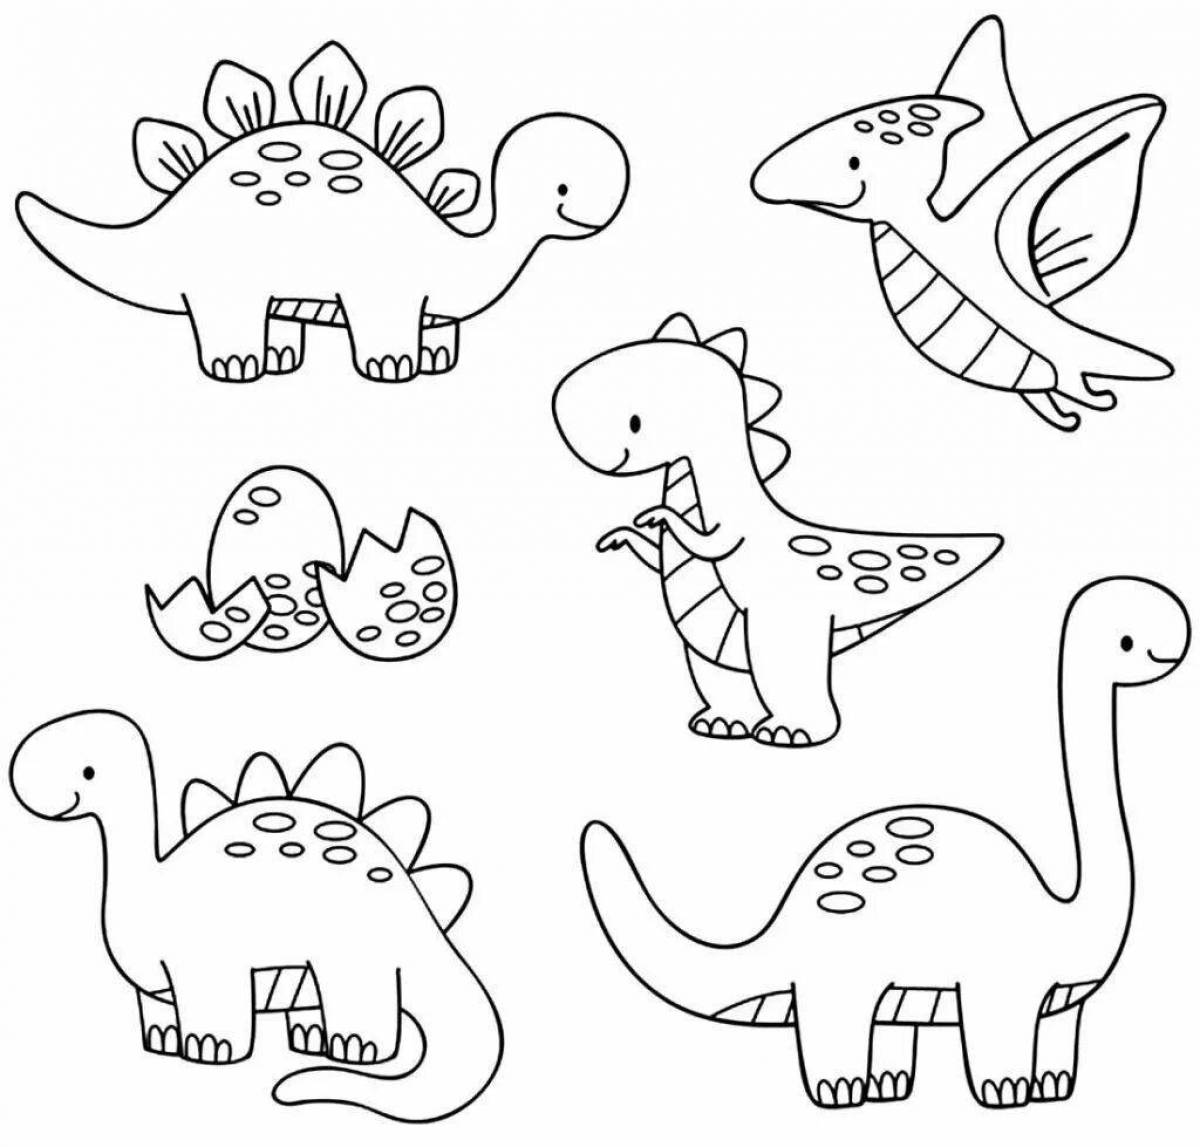 Attractive dinosaur drawings for coloring